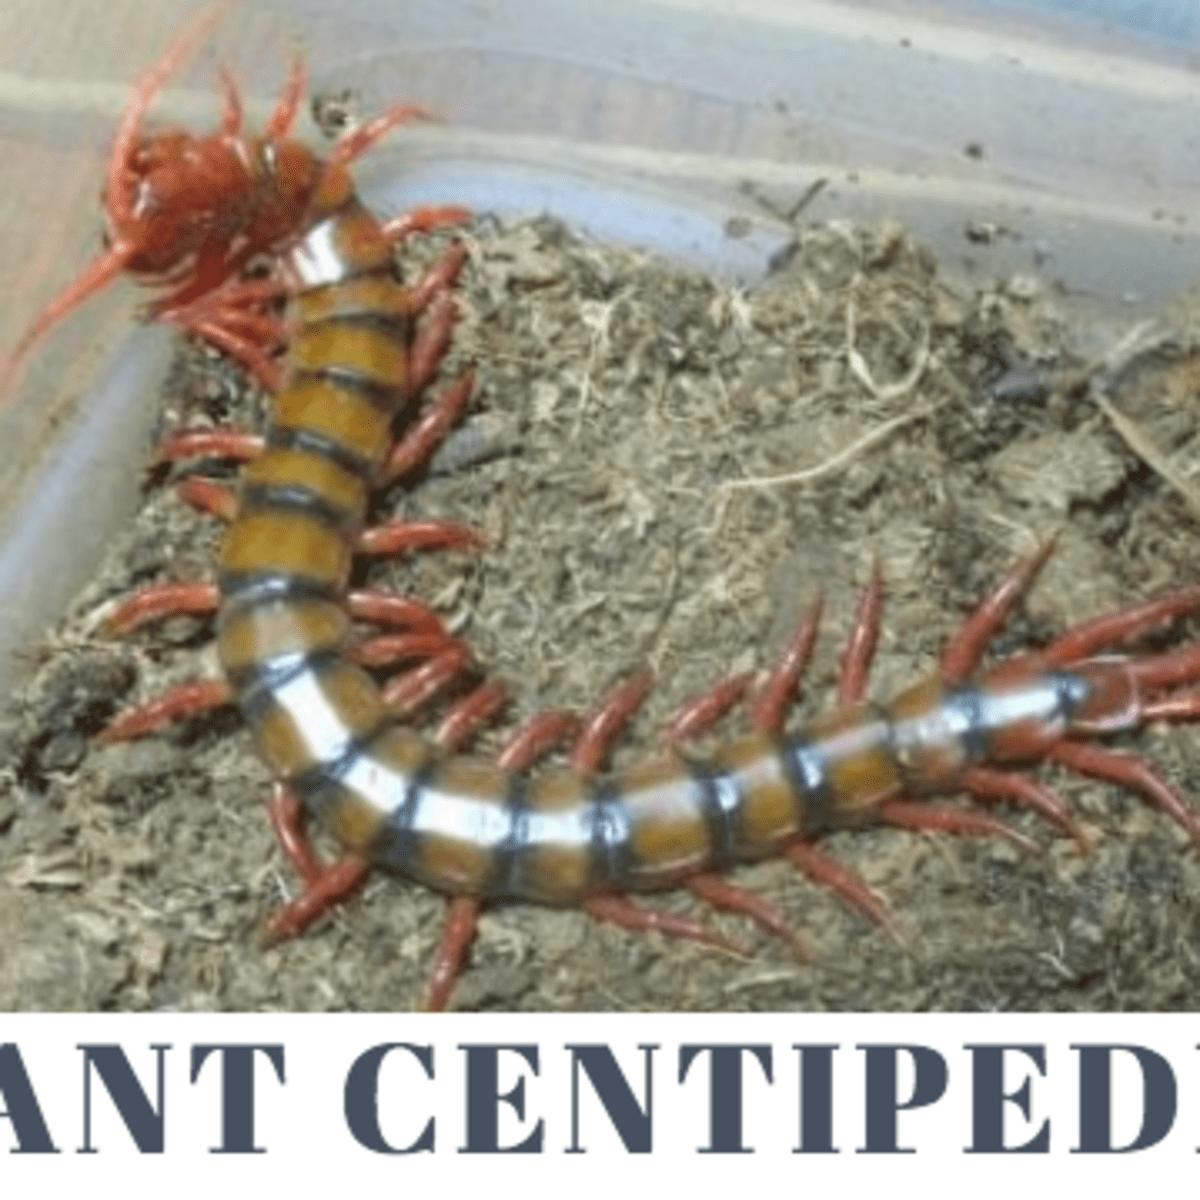 Living in Hawaii: How to Survive the Big Centipedes - Dengarden